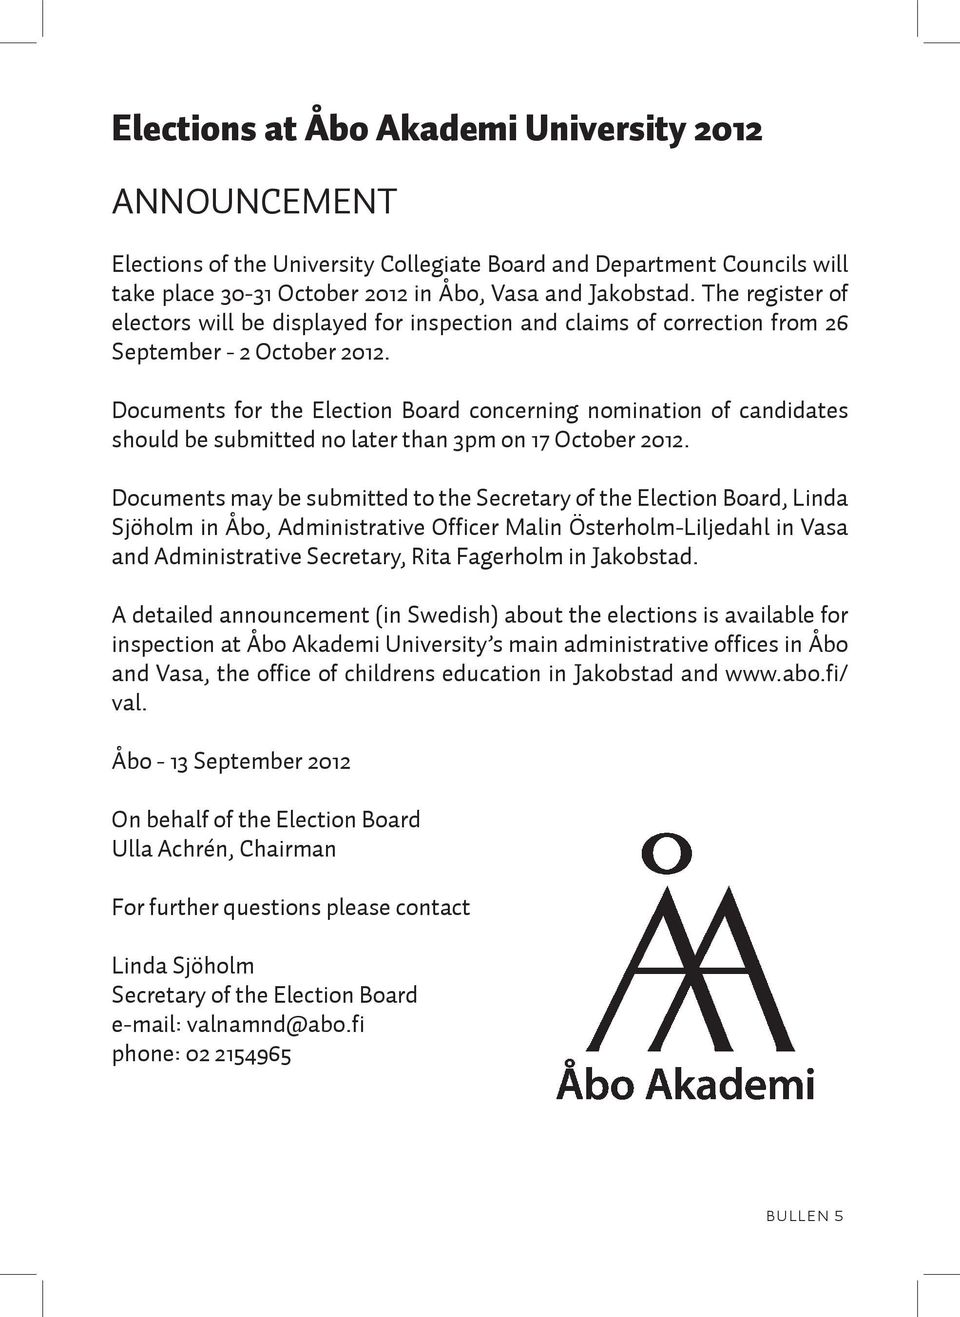 Documents for the Election Board concerning nomination of candidates should be submitted no later than 3pm on 17 October 2012.